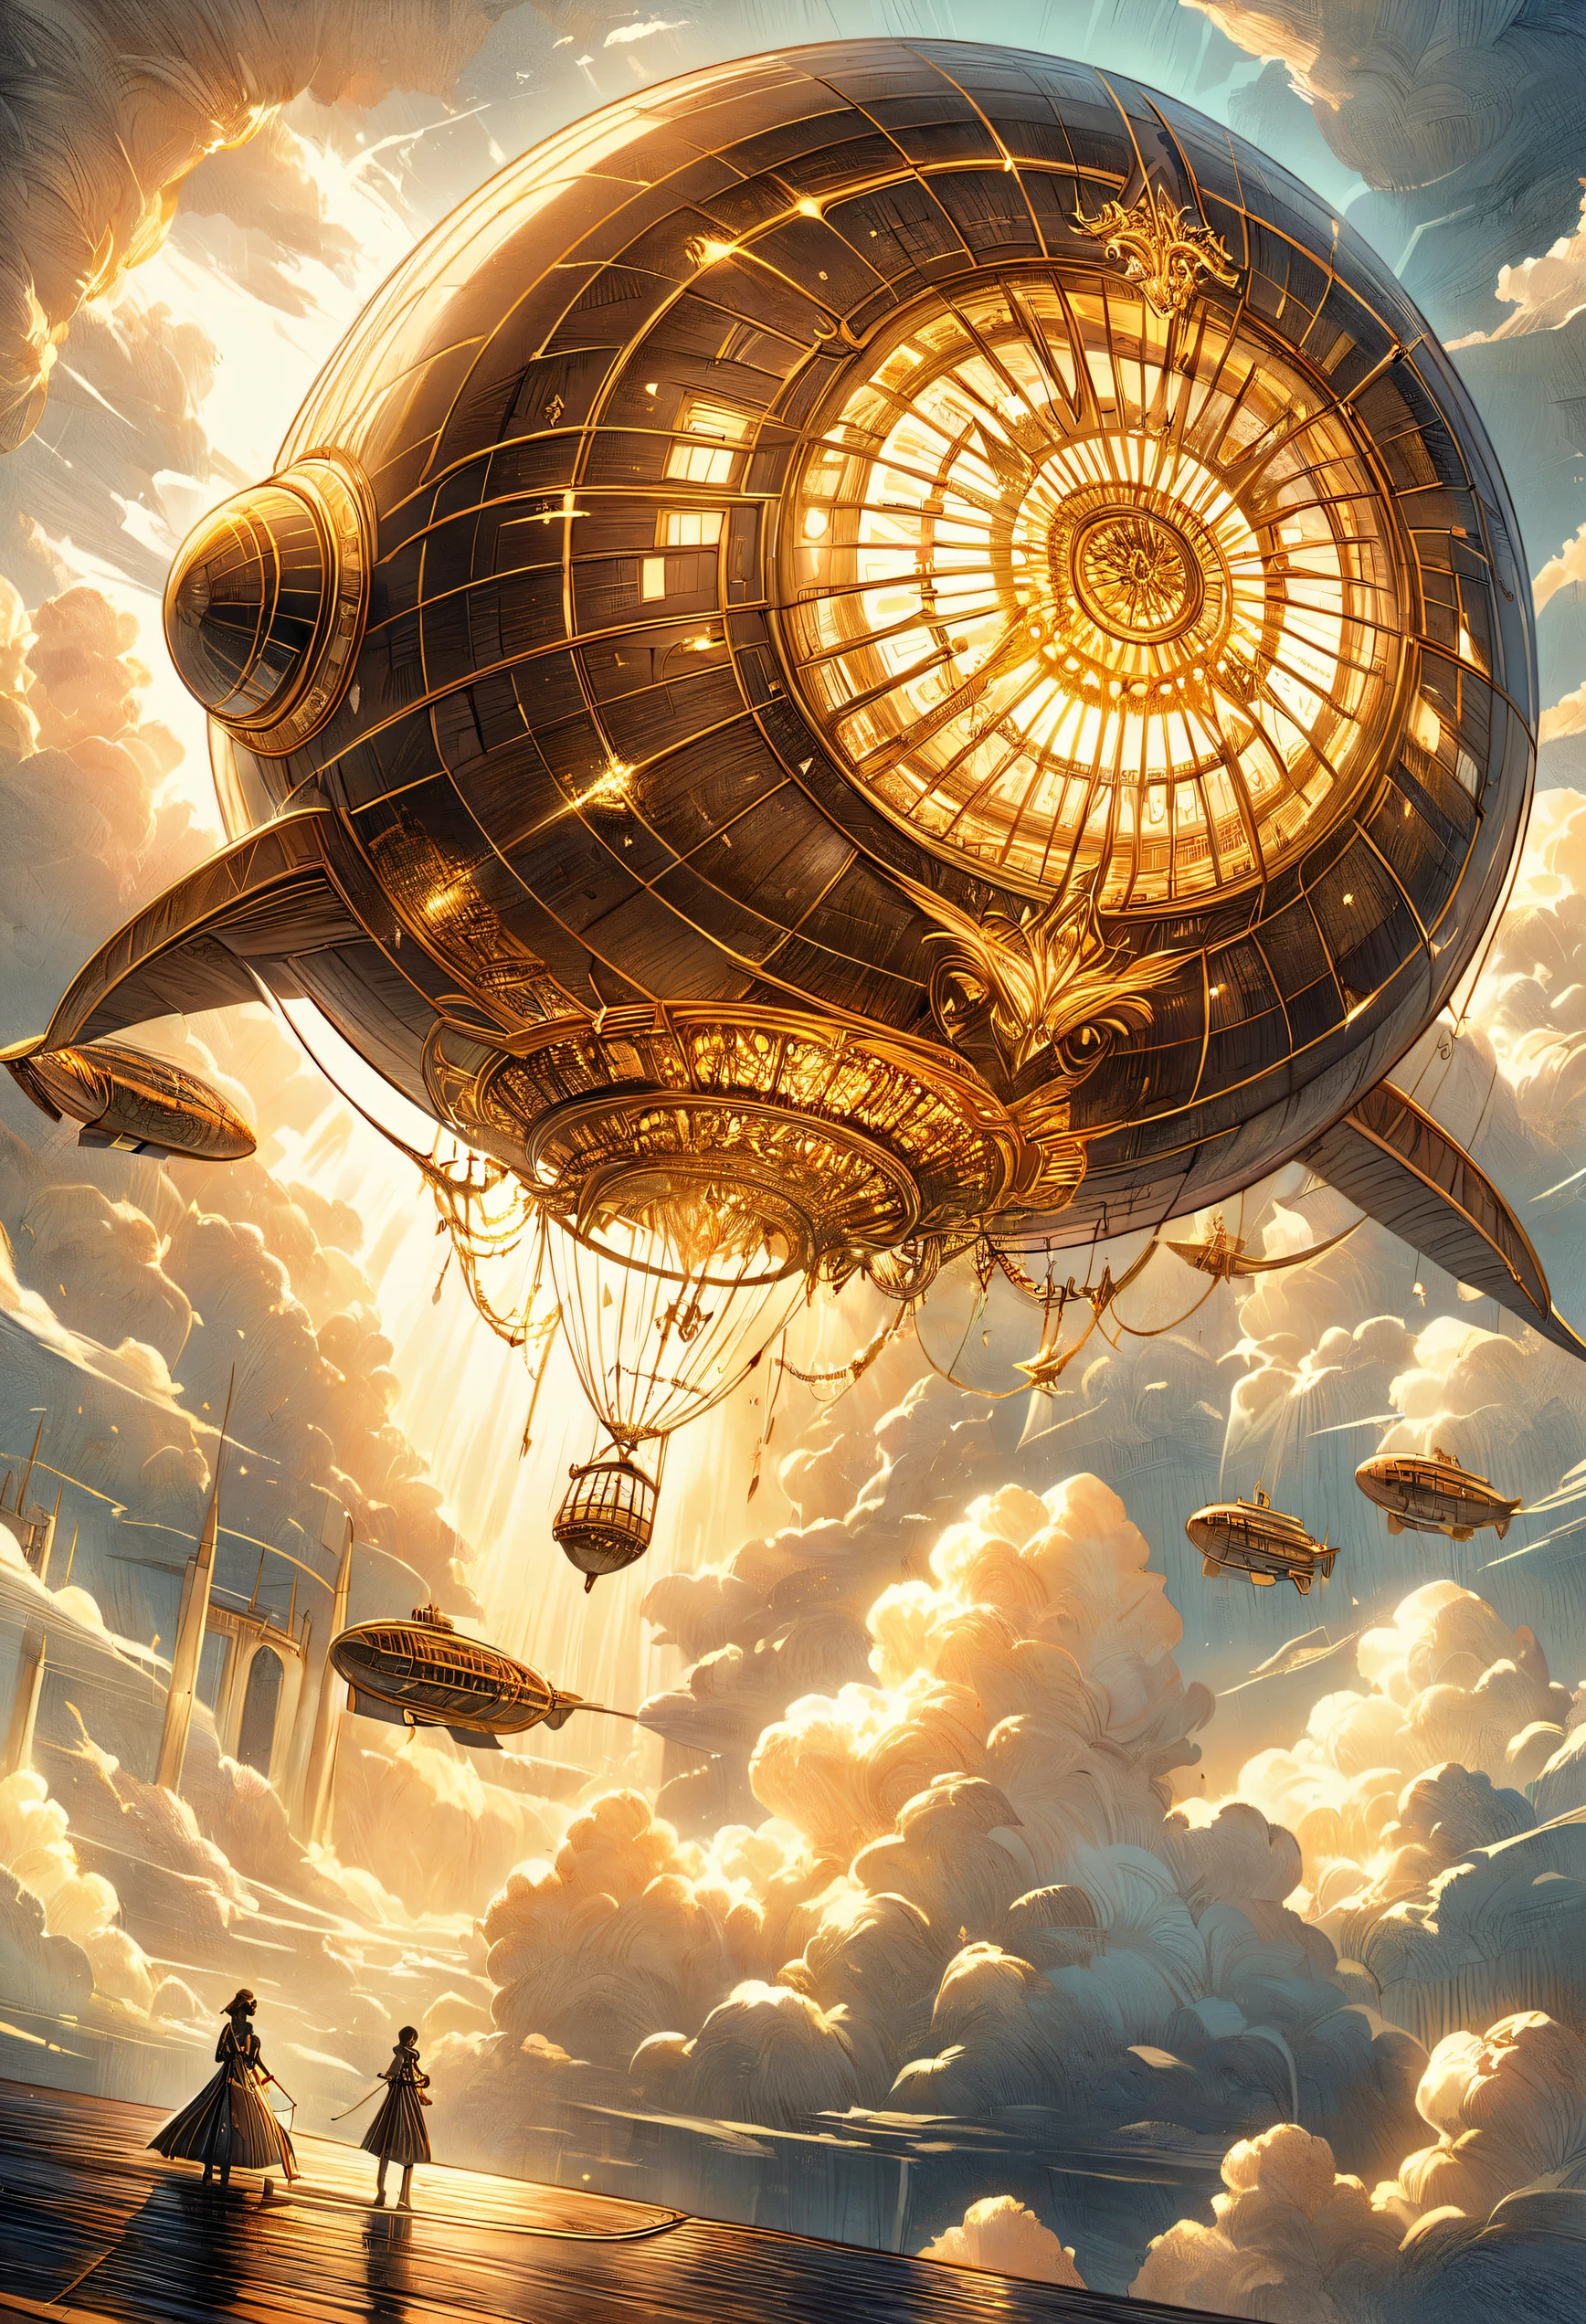 A beautiful ivory and gold dirigible floating gracefully amongst the clouds. The dirigible has intricate details with its ivory-colored body and gold accents. The craftsmanship is of the highest quality, with exquisite engravings and delicate patterns. The clouds surrounding the dirigible create a dreamy and ethereal atmosphere. The sunlight filters through the clouds, casting a golden glow on the airship. The scene is captured in a medium of digital illustration, combining the realism of photography with the artistic touch of concept art. The colors are vibrant and vivid, with a warm color palette dominated by gold and ivory tones. The lighting is soft yet dramatic, emphasizing the elegance and grandeur of the dirigible. The overall image quality is exceptional, with ultra-detailed elements and a high-resolution rendering. Every minute detail, from the individual clouds to the smallest gold embellishment, is immaculately represented. The prompt is carefully designed to generate a visually stunning and awe-inspiring image of an ivory and gold dirigible floating amidst the clouds.